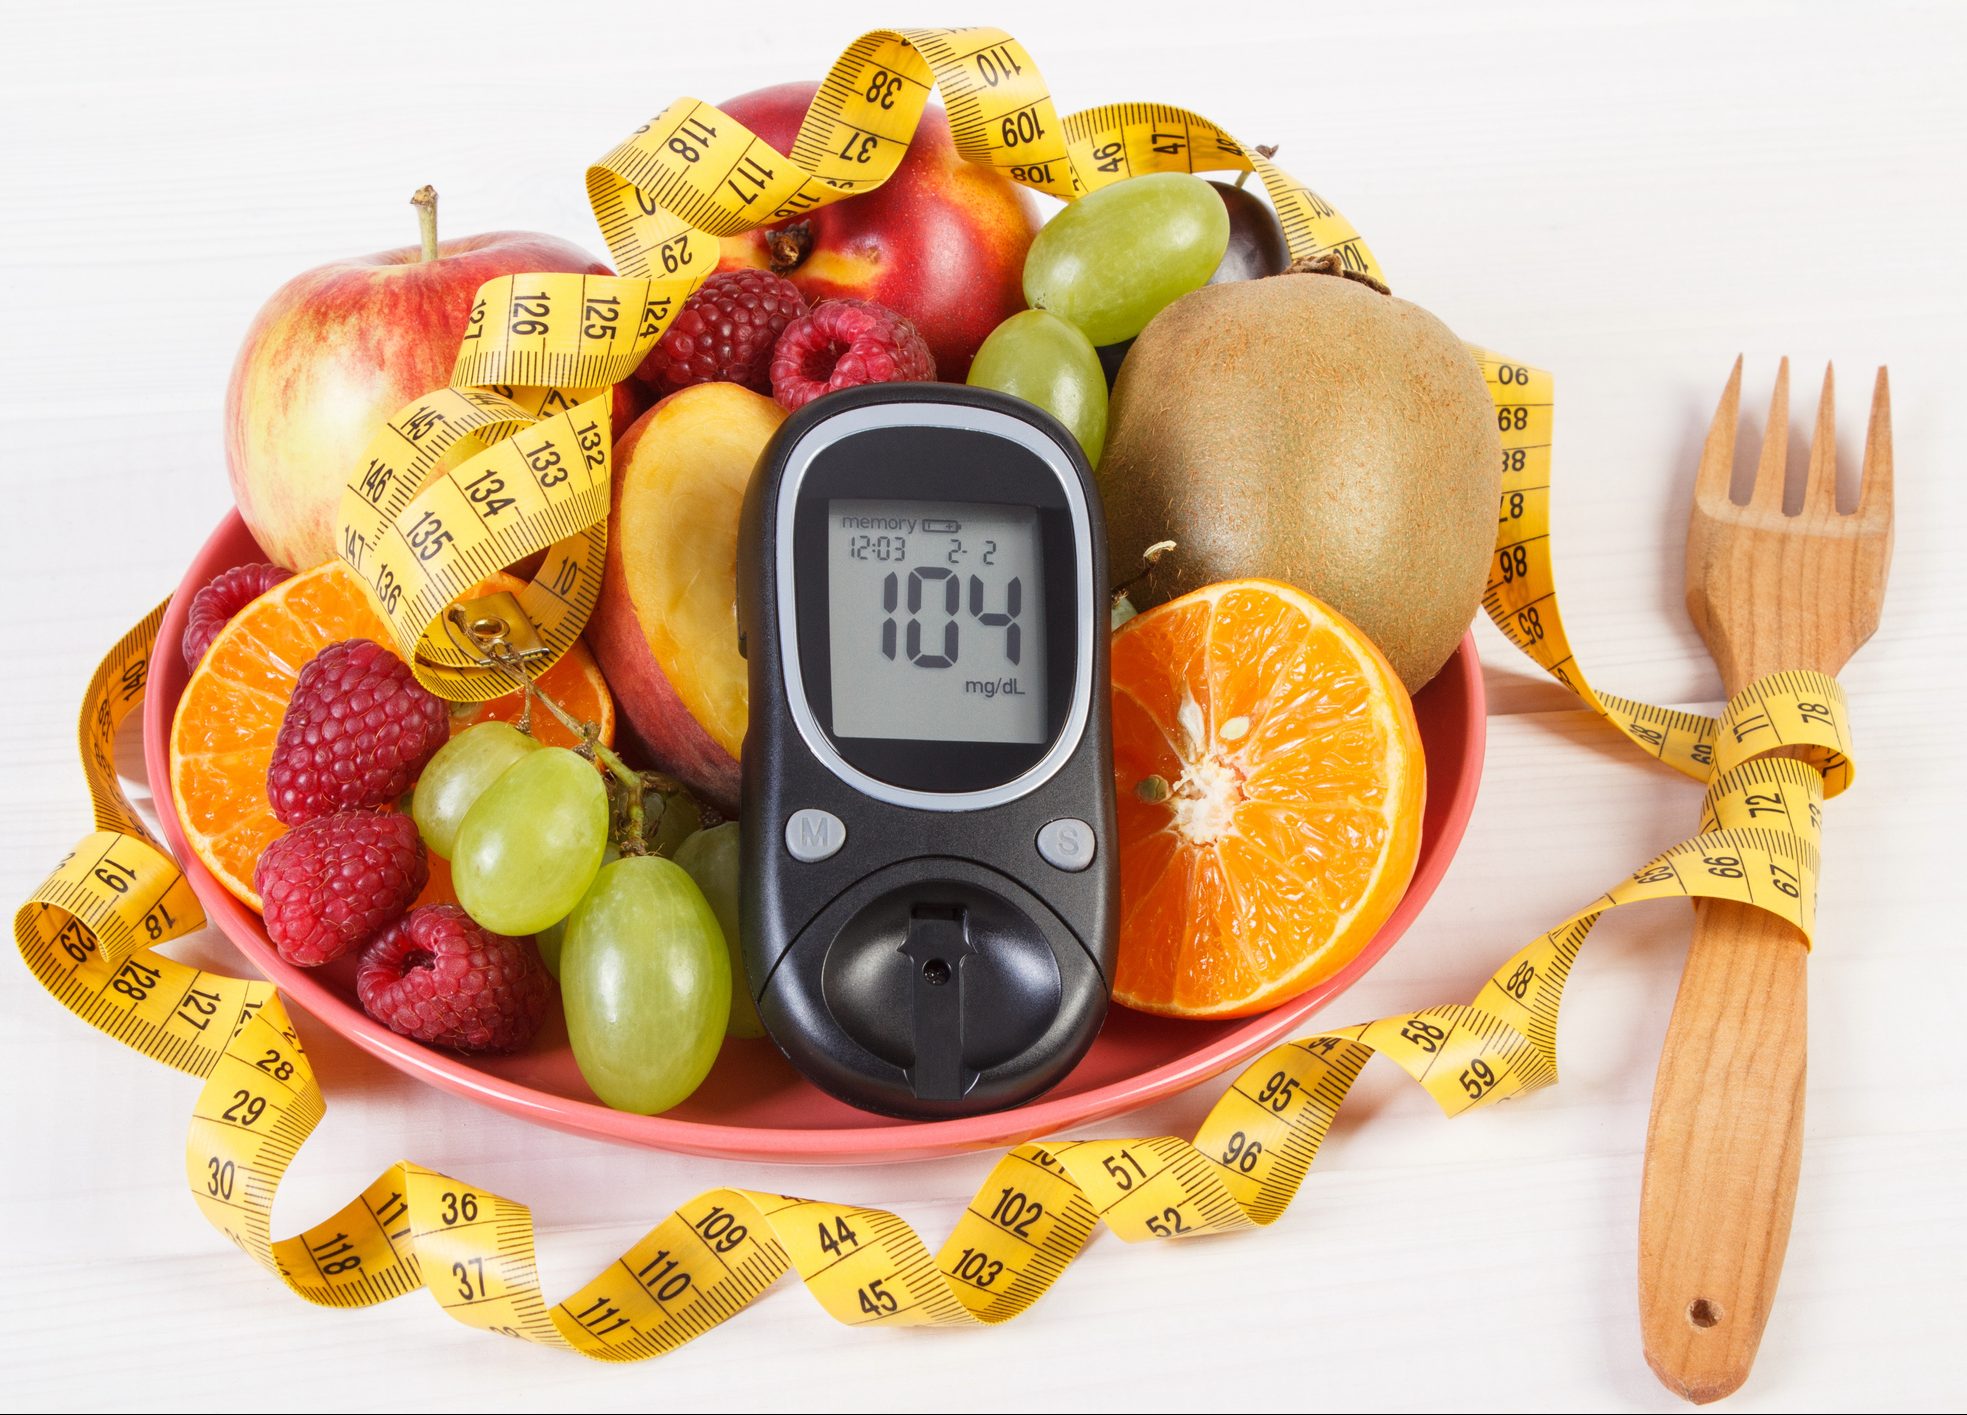 FUNIBER-glucometer-fresh-fruits-on-plate-and-centimeter